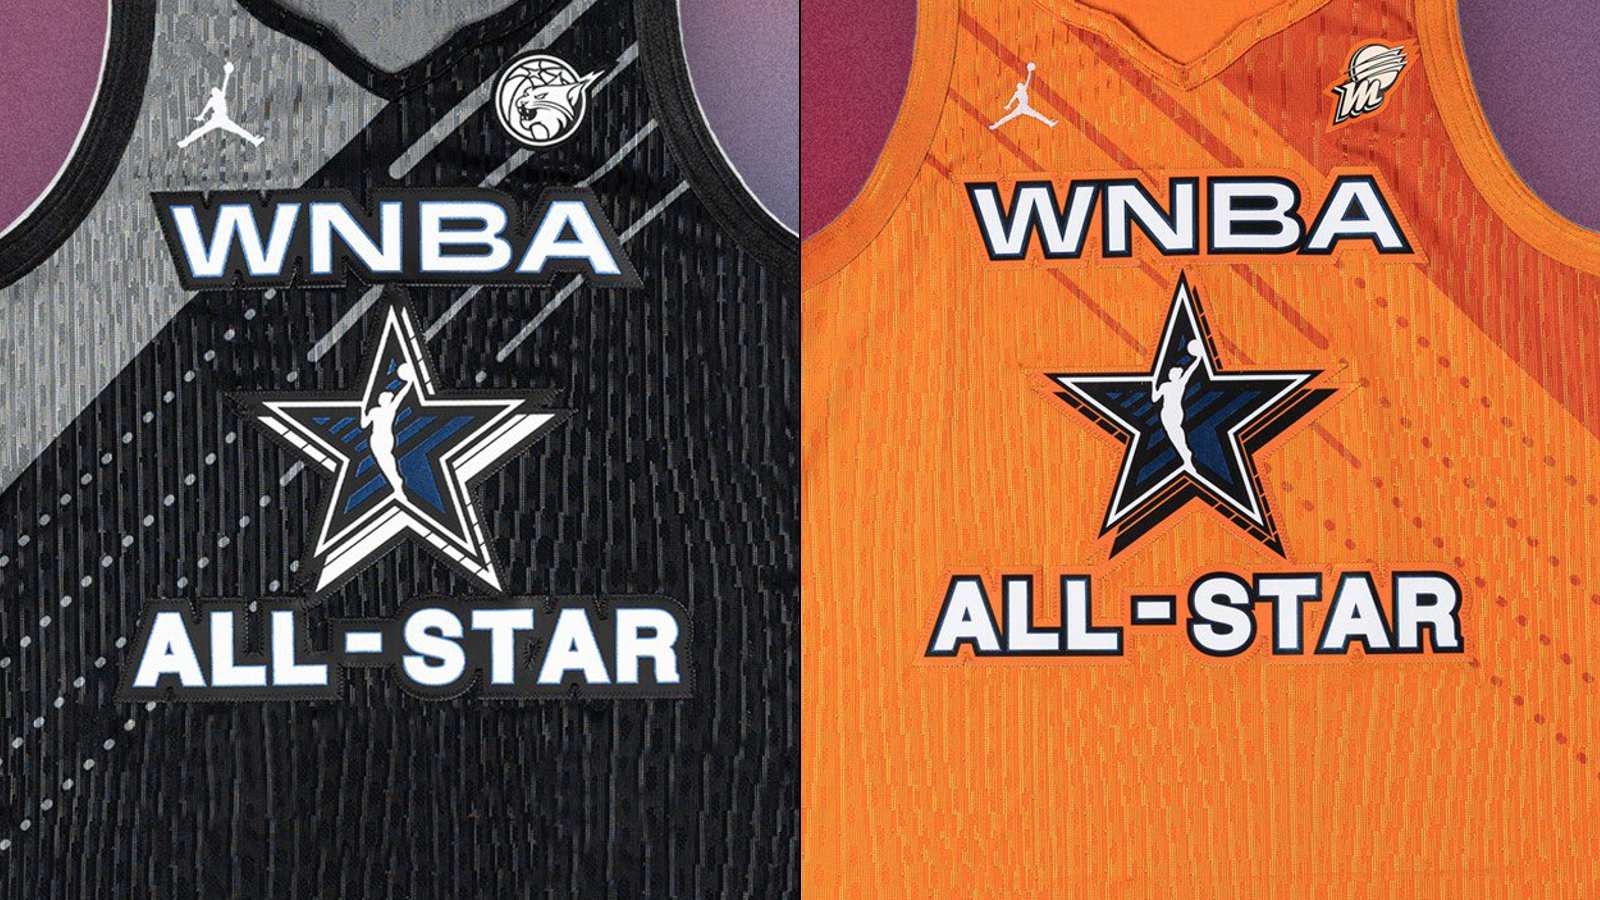 The Jumpman Logo Will Appear On WNBA Jerseys For The First Time in